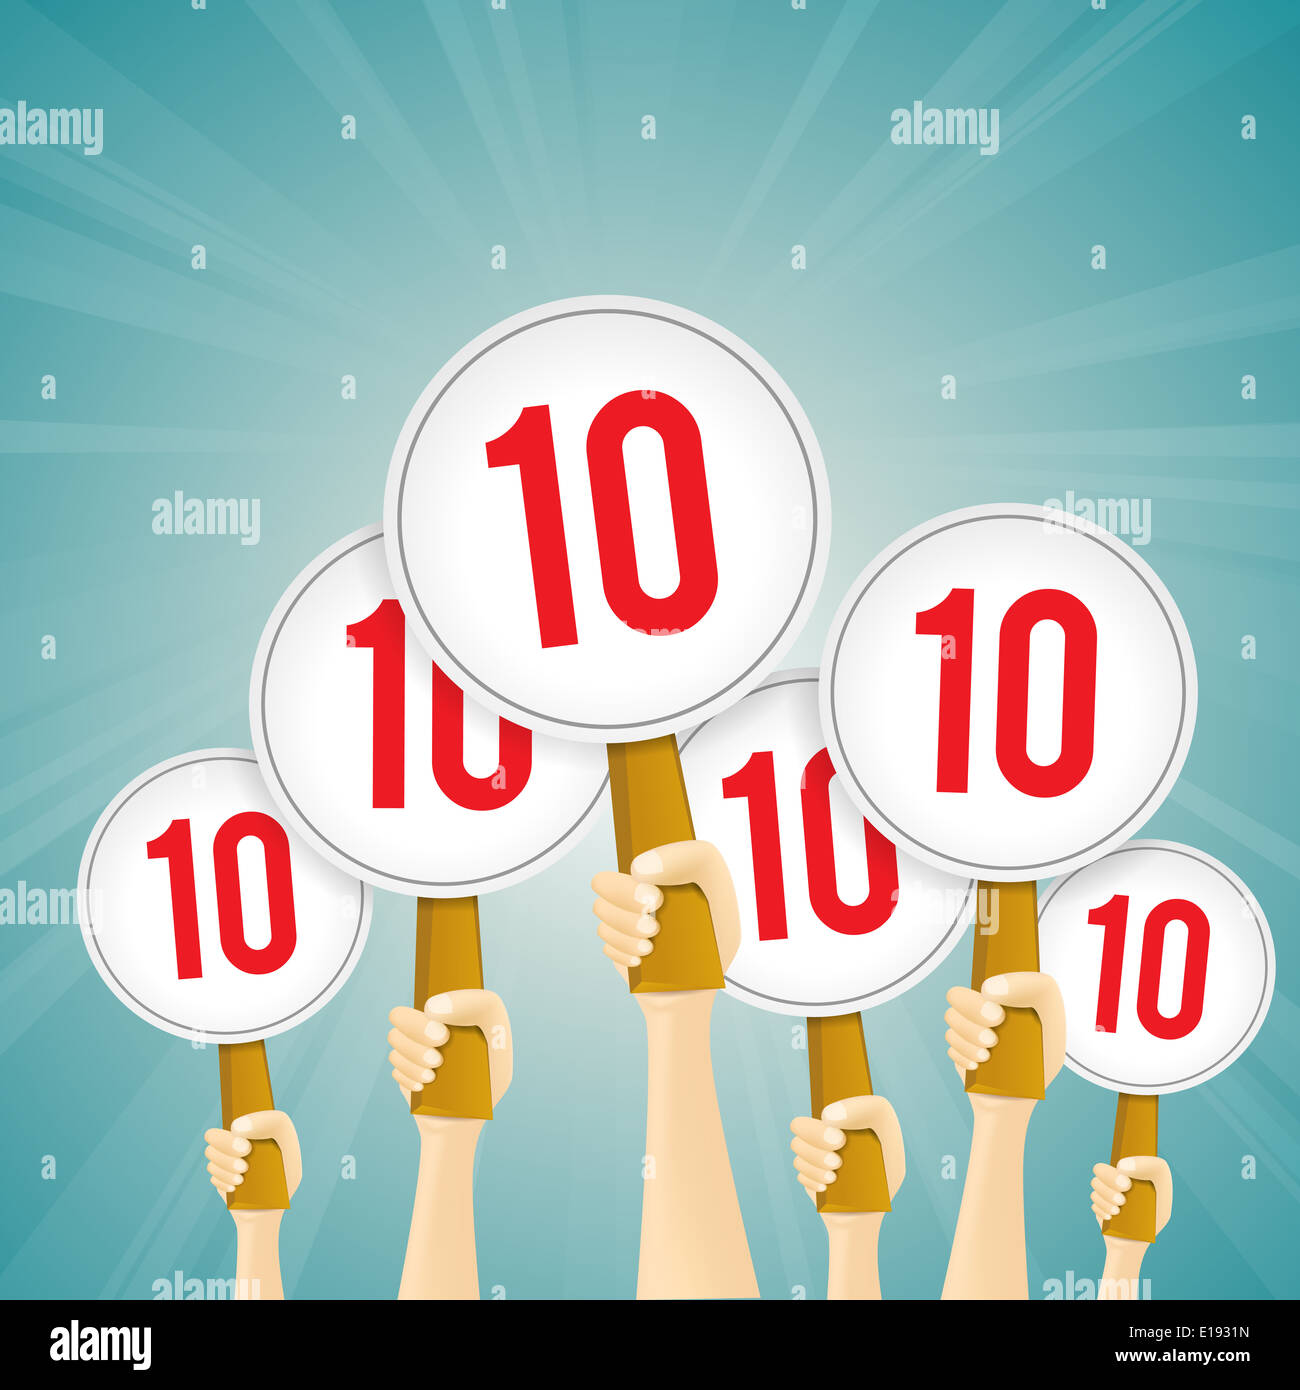 Vector illustration of several hands holding perfect 10 score signs. Stock Photo